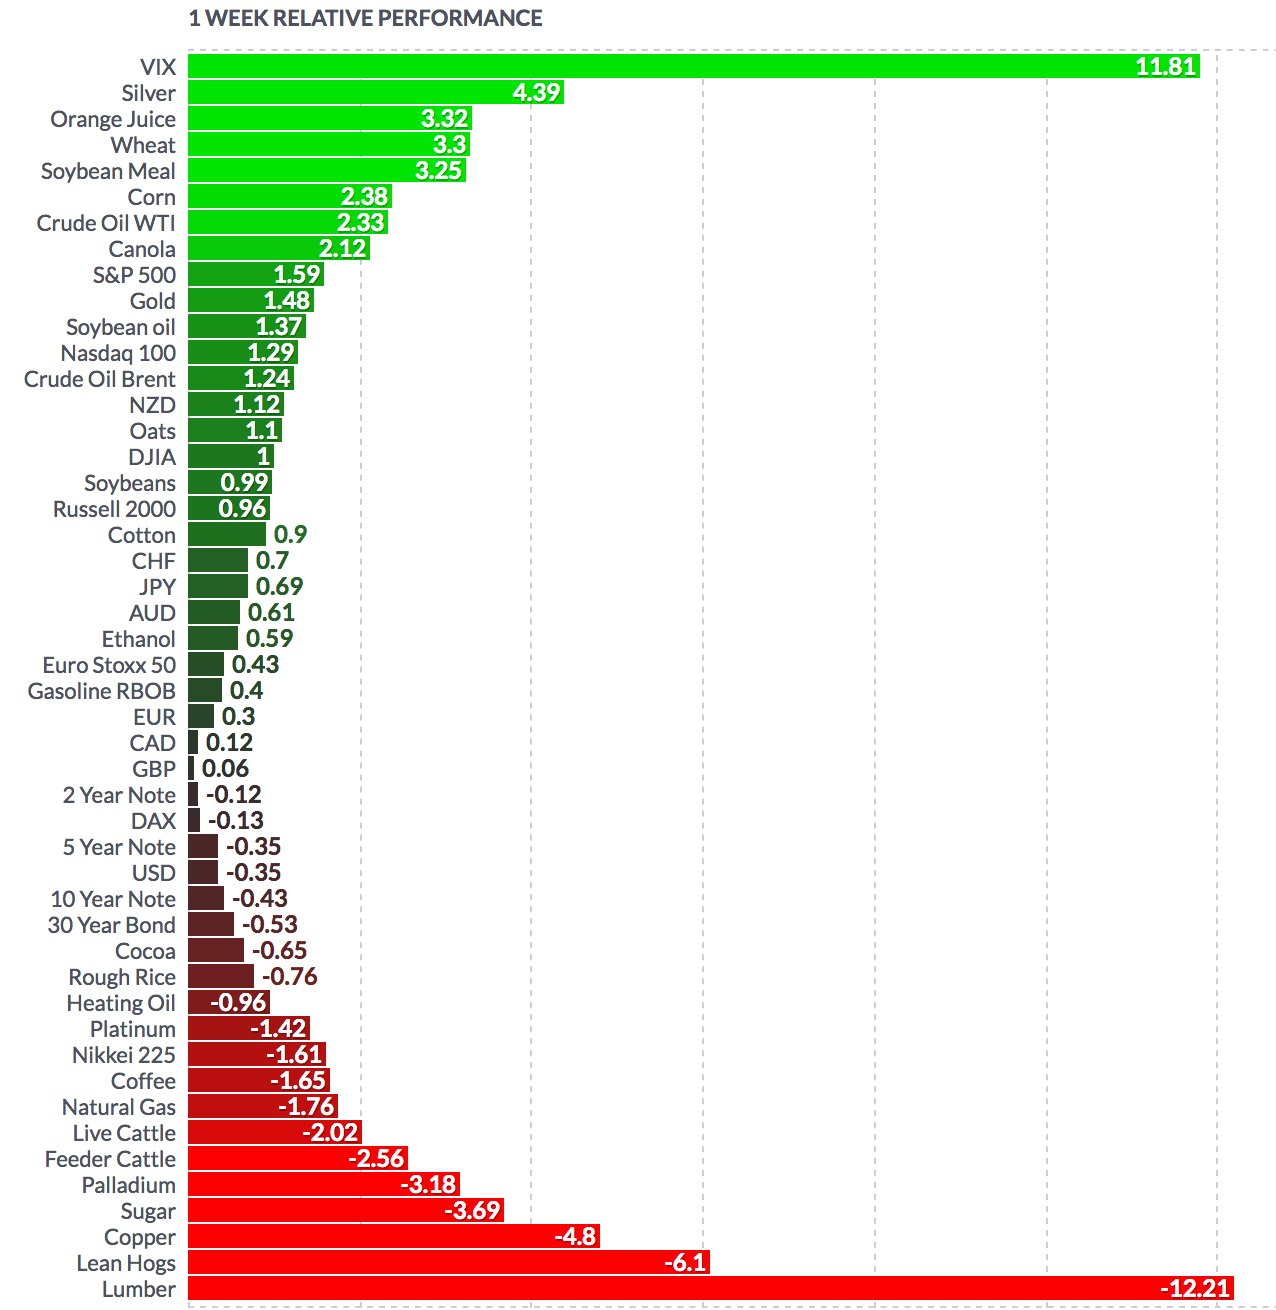 Weekly Performance of Futures